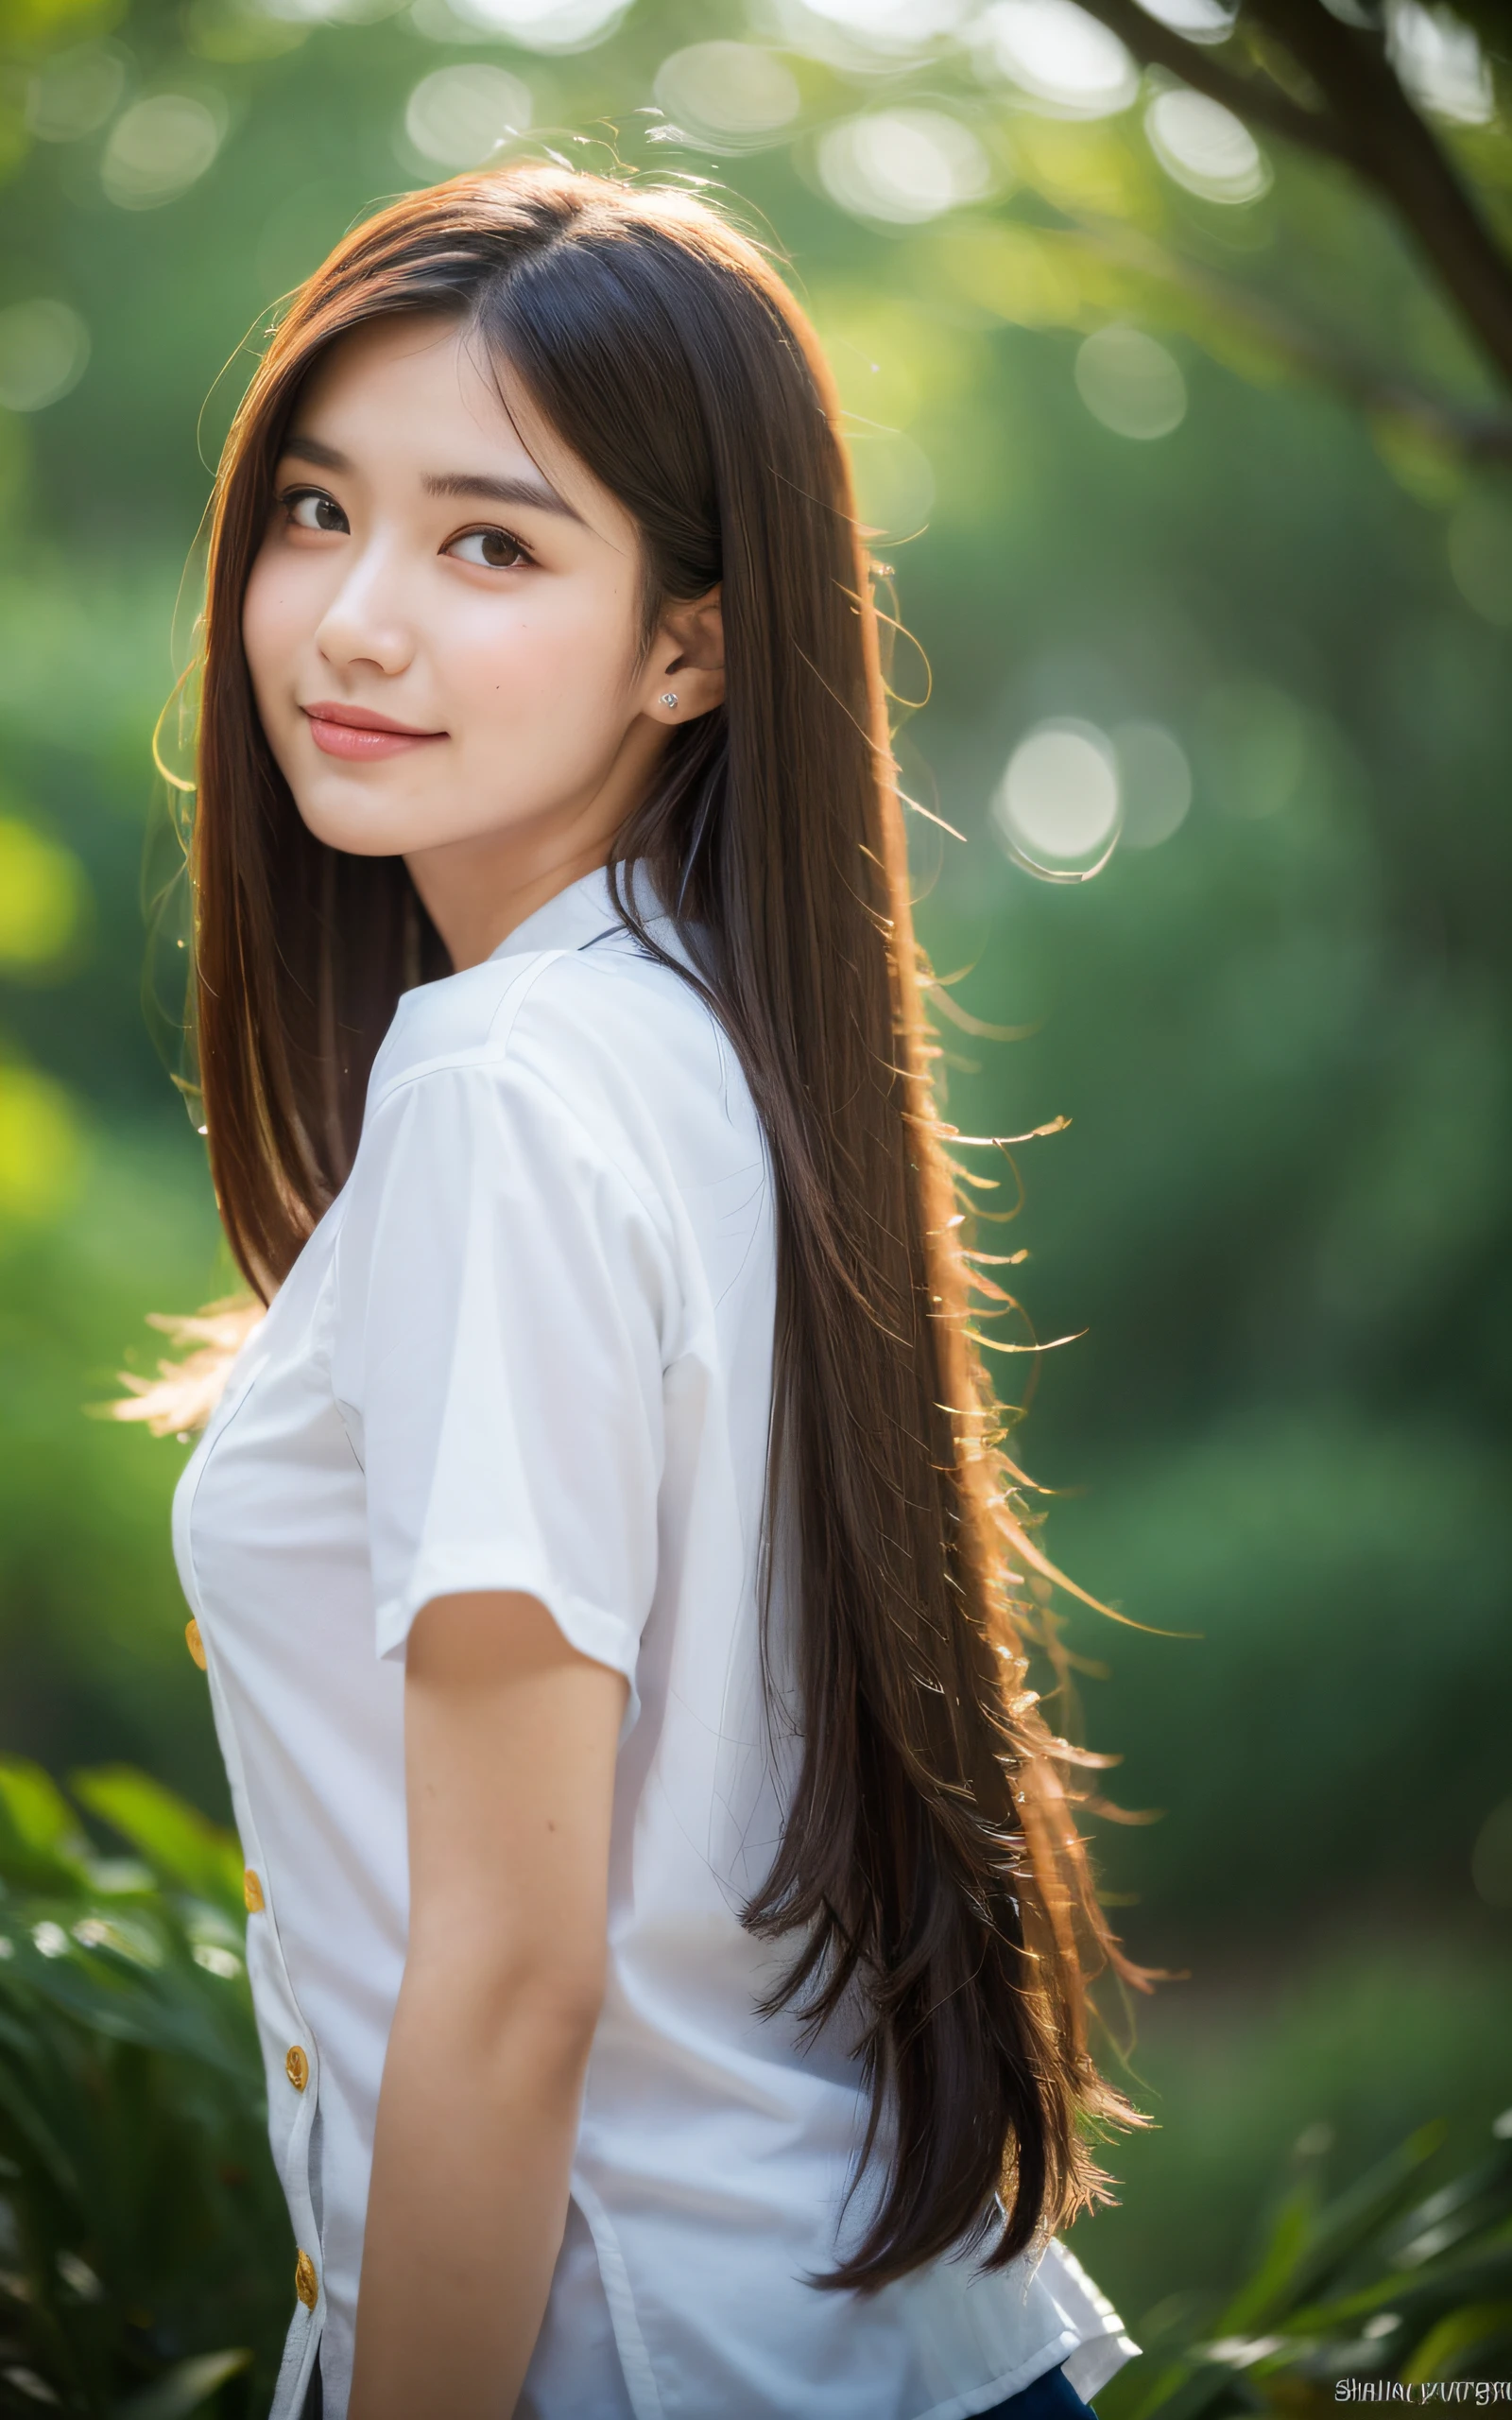 ((Best quality, 8k, Masterpiece: 1.3)), Sharp focus: 1.2, 1 girl, 16 years old, A pretty girl with perfect figure, cute, shy, ((sway in the wind shoulder length straight hair)), (White shirt with buttons: 1.1), skirt, Highly detailed face and skin texture, Detailed eyes, forest lake with mist